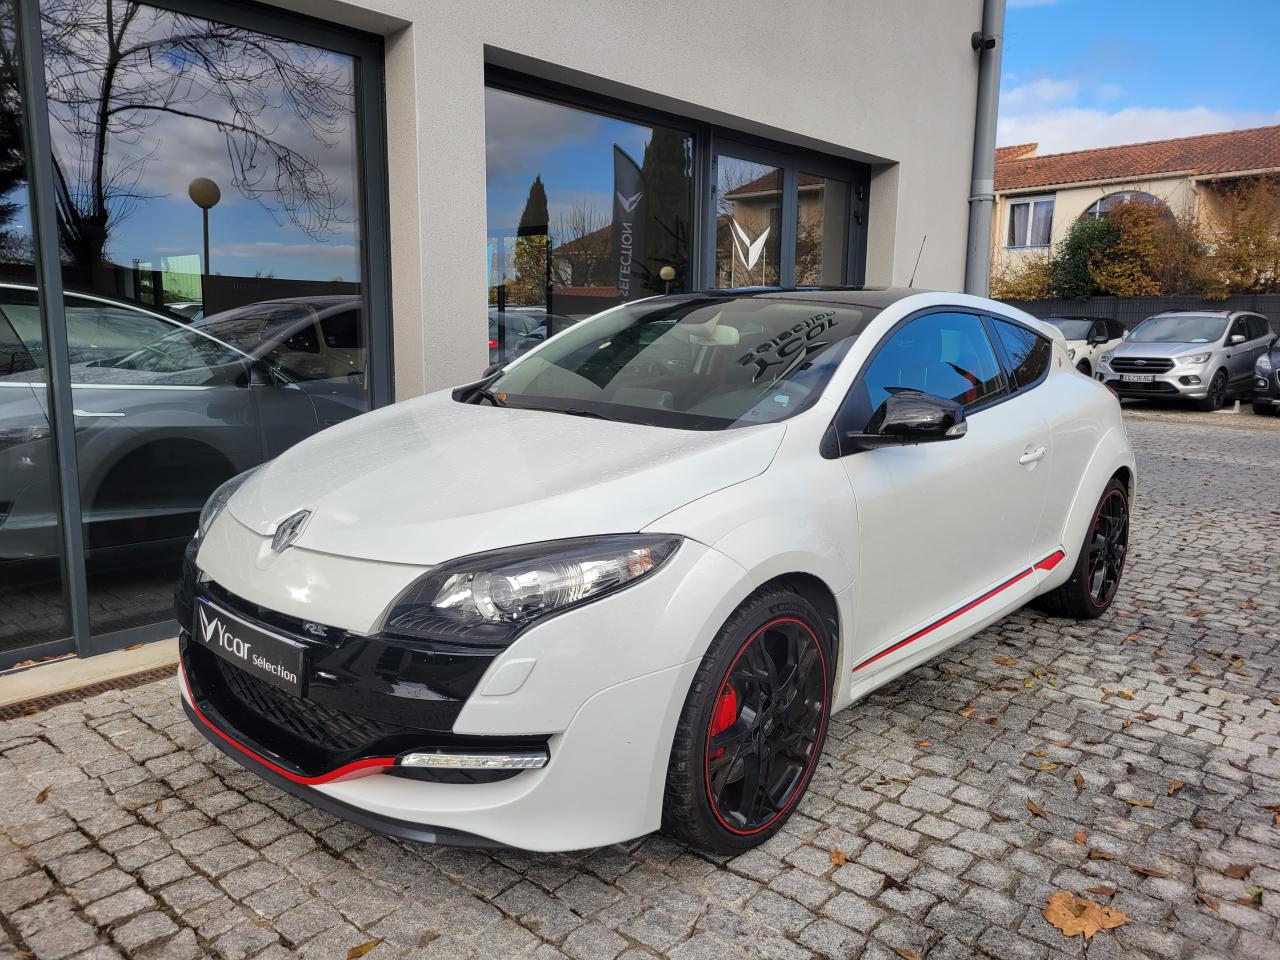 RENAULT MEGANE COUPE renault-megane-3-iii-rs-cup-2-0t-265-kit-distrib-neuf-69000km-r-link-4-combine-fil  Used - the parking